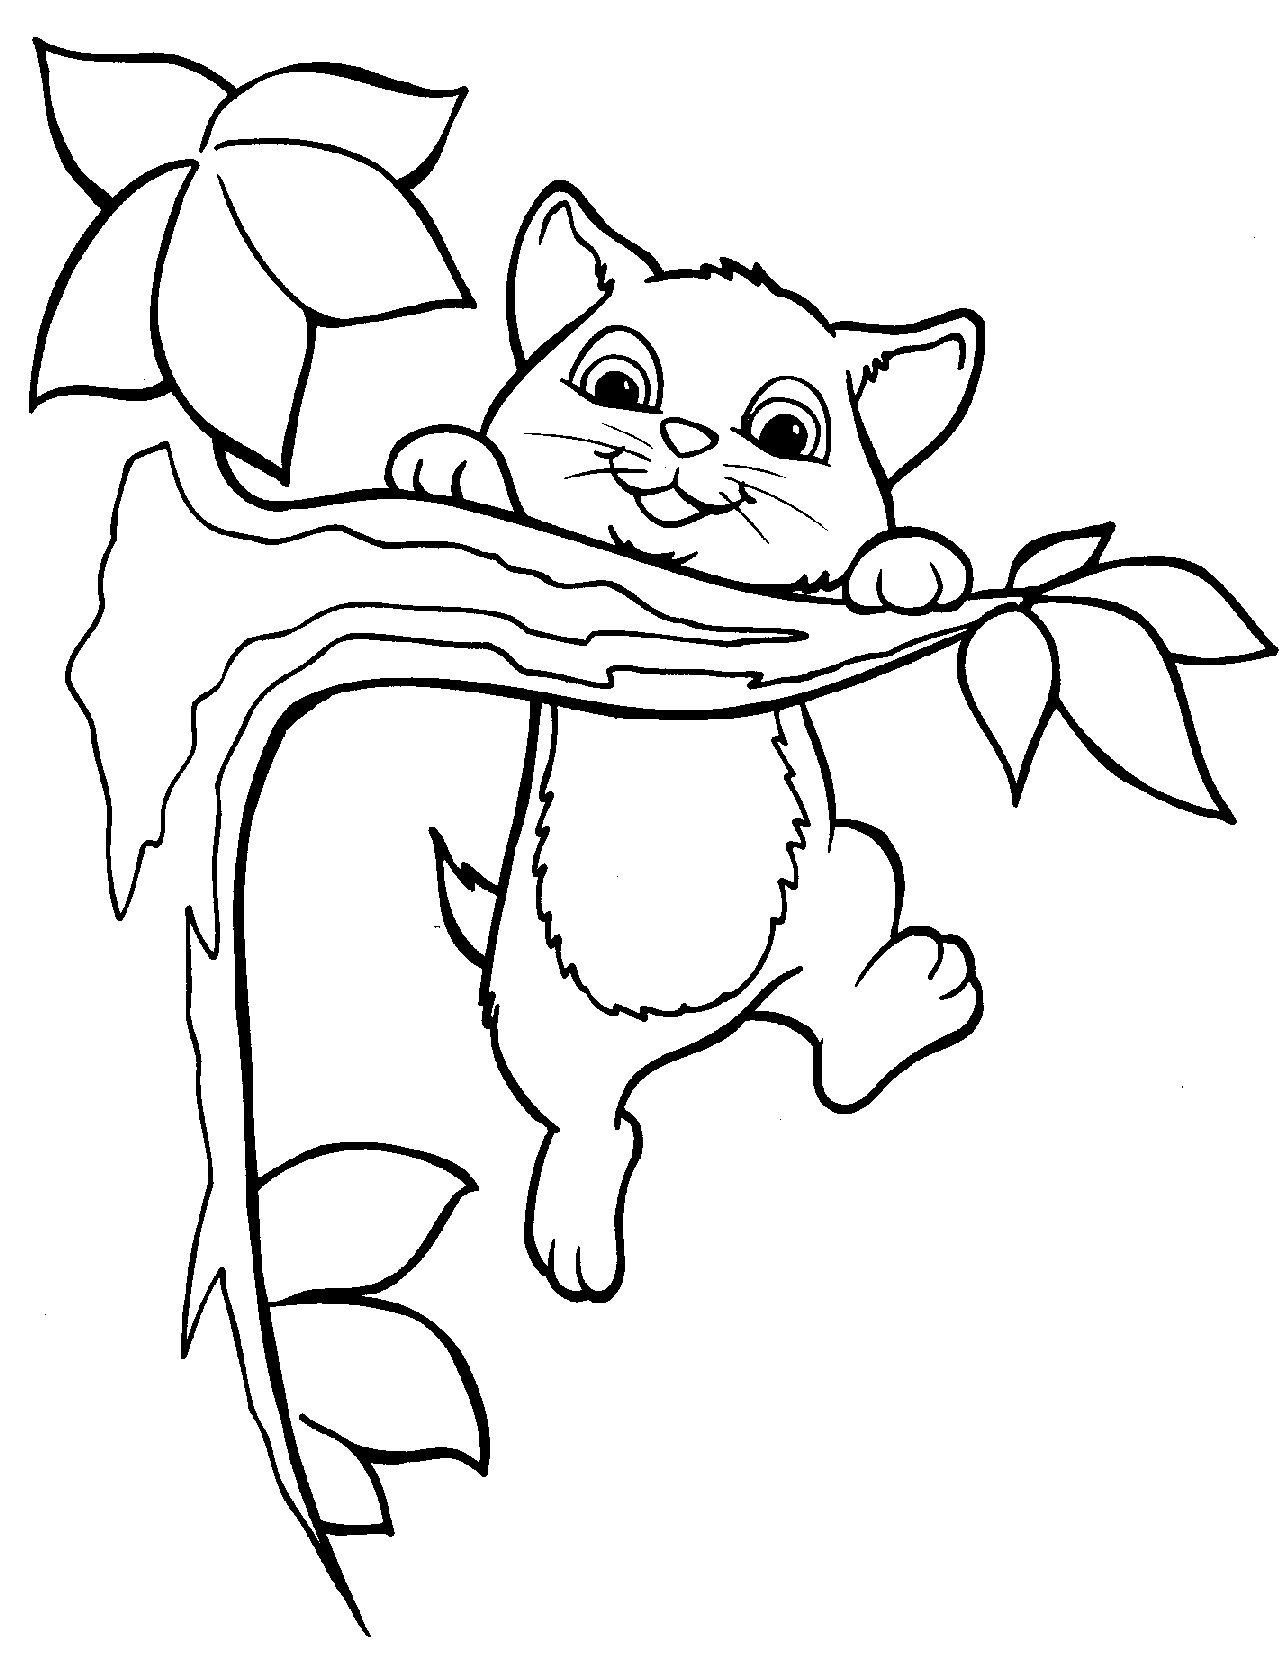 coloring pages of cats cat color pages printable cat coloring sheets animal pages coloring of cats 